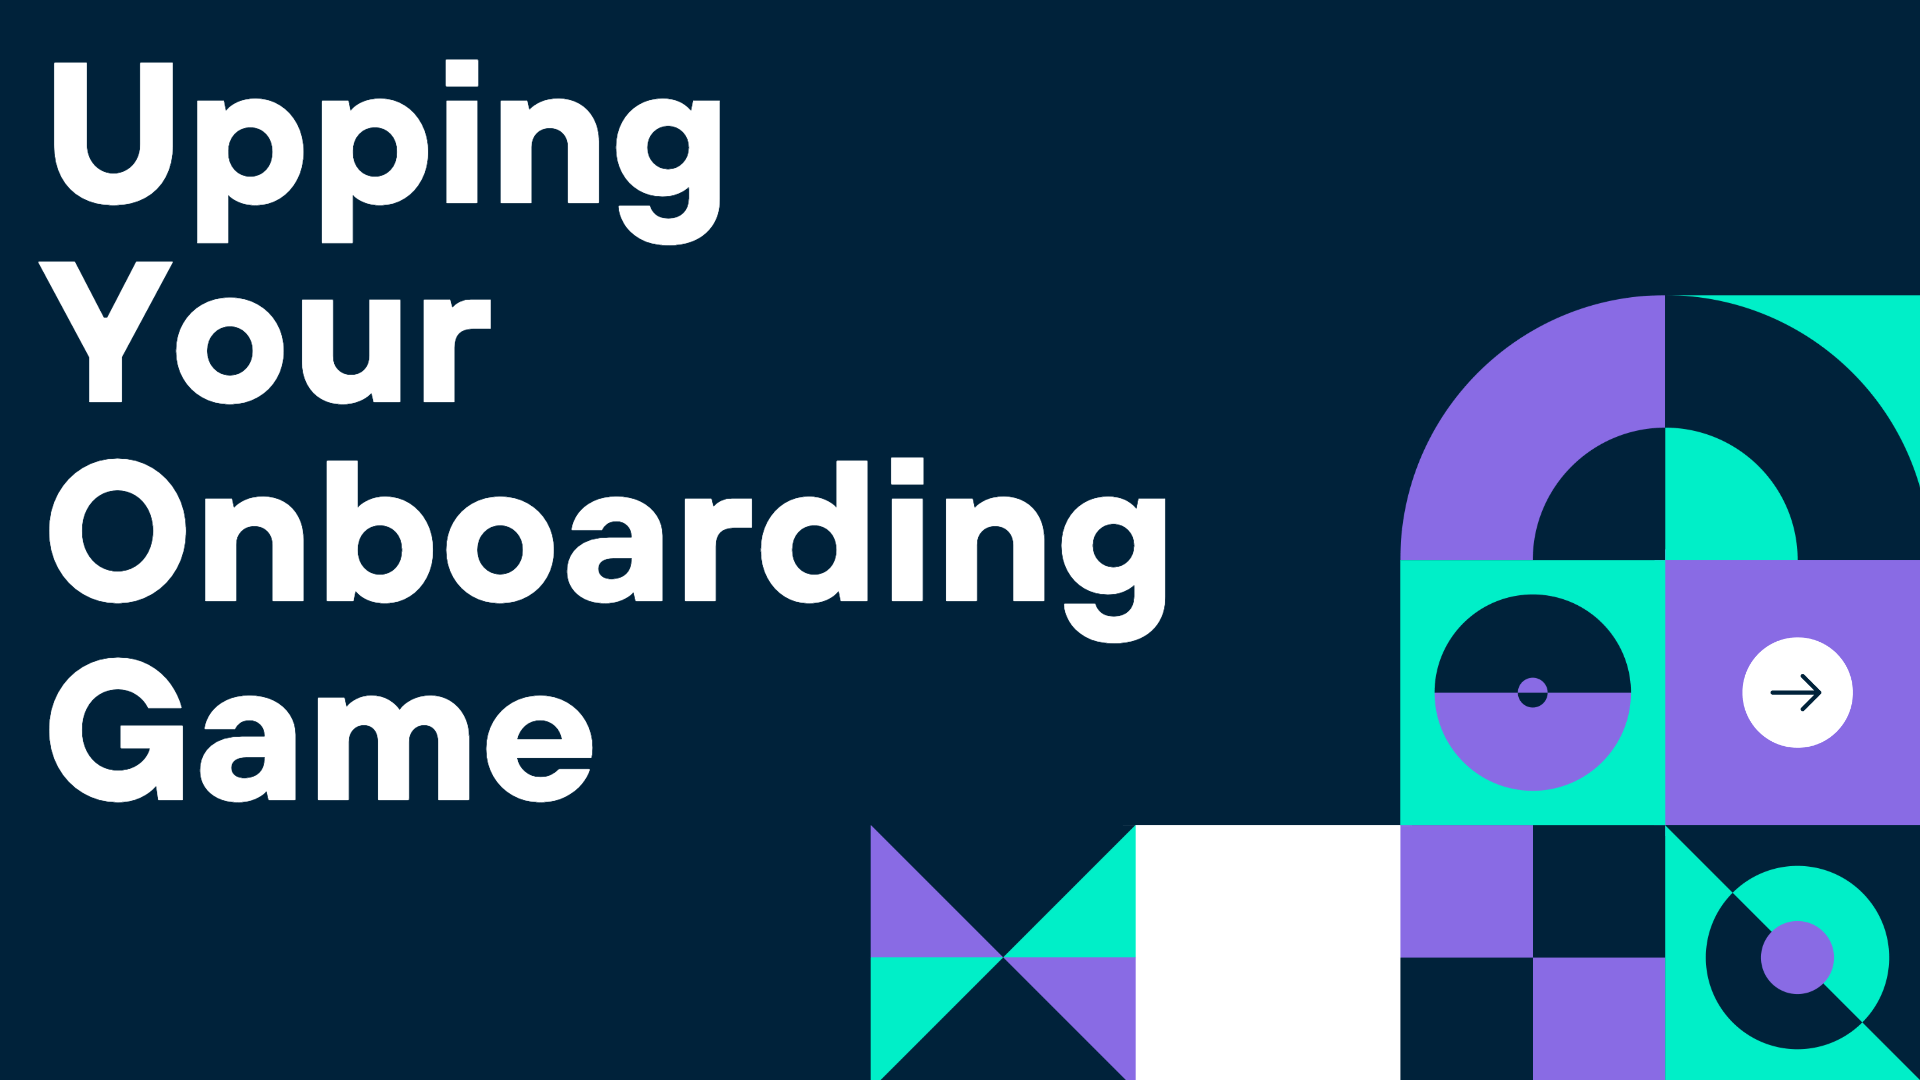 Upping Your Onboarding Game